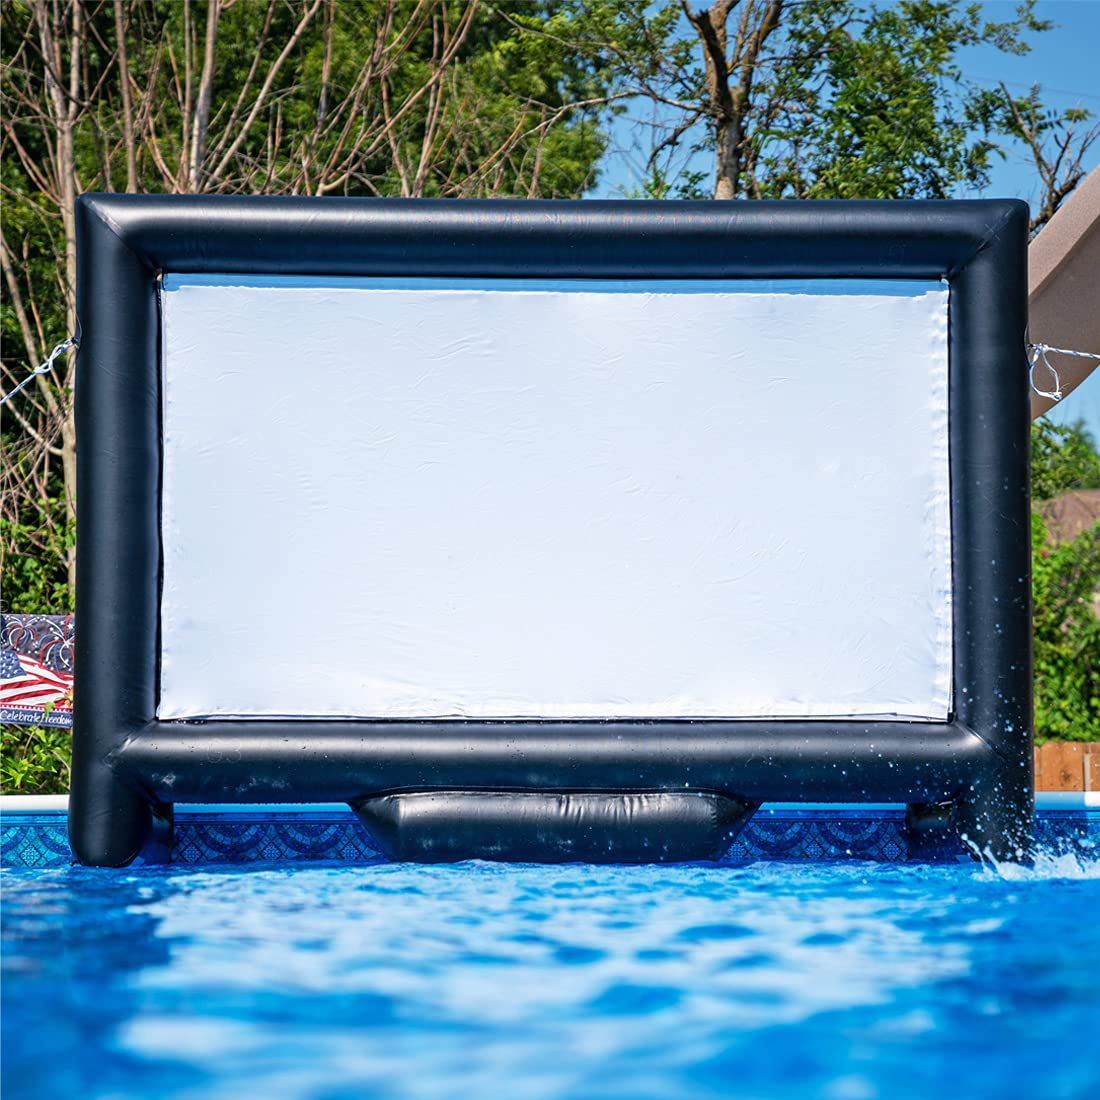 Sewinfla Outdoor Movie Screen 10ft- Upgraded Airtight Design Inflatable Movie Projector Screen for Outdoor/Indoor Use - No Need to Keep Inflating - Supports Front and Rear Projection